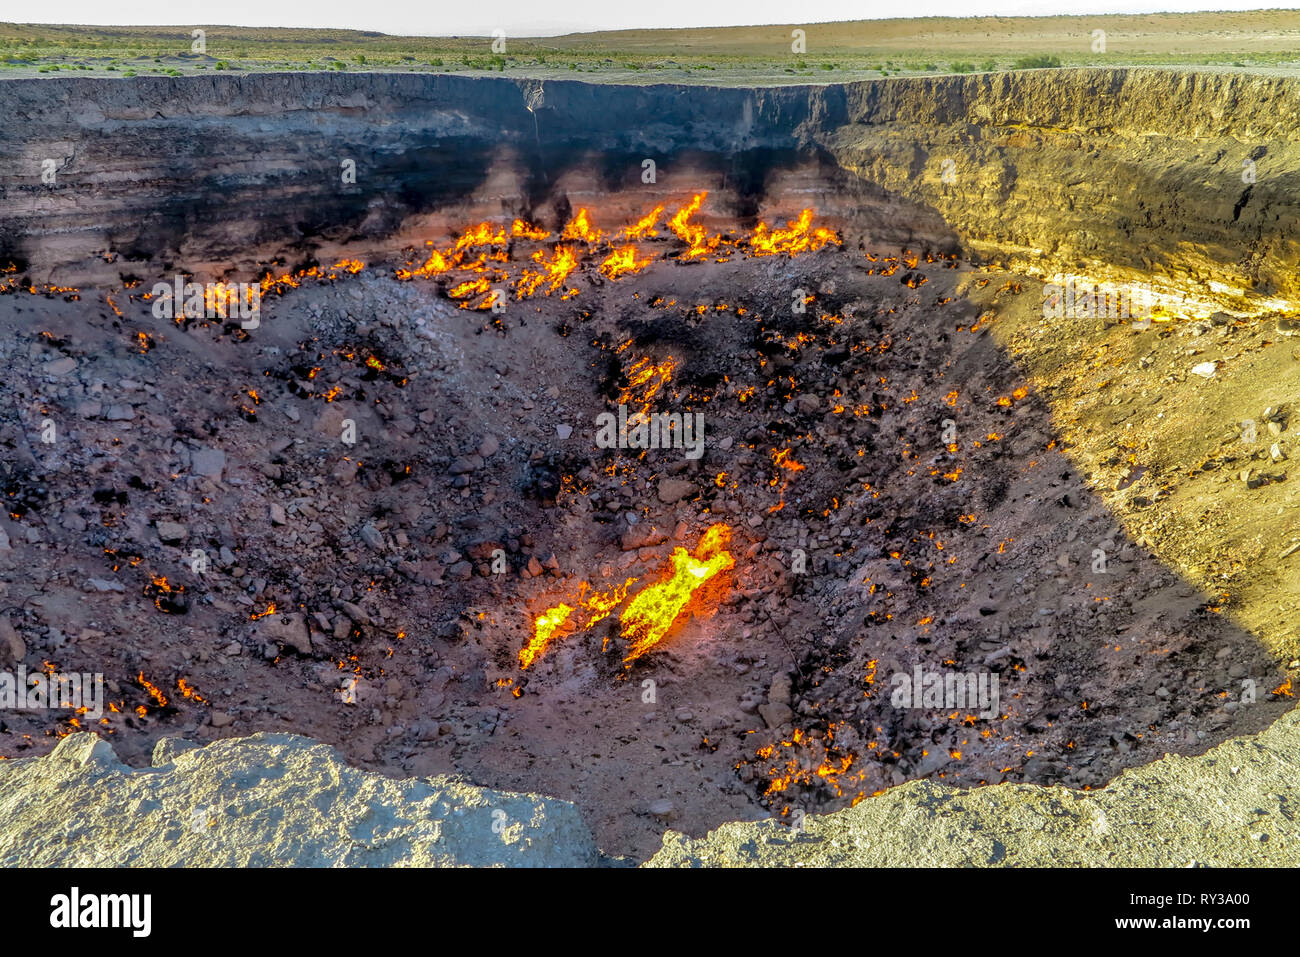 Darvaza Gas Crater Pit Breathtaking Close Up Flames View Stock Photo